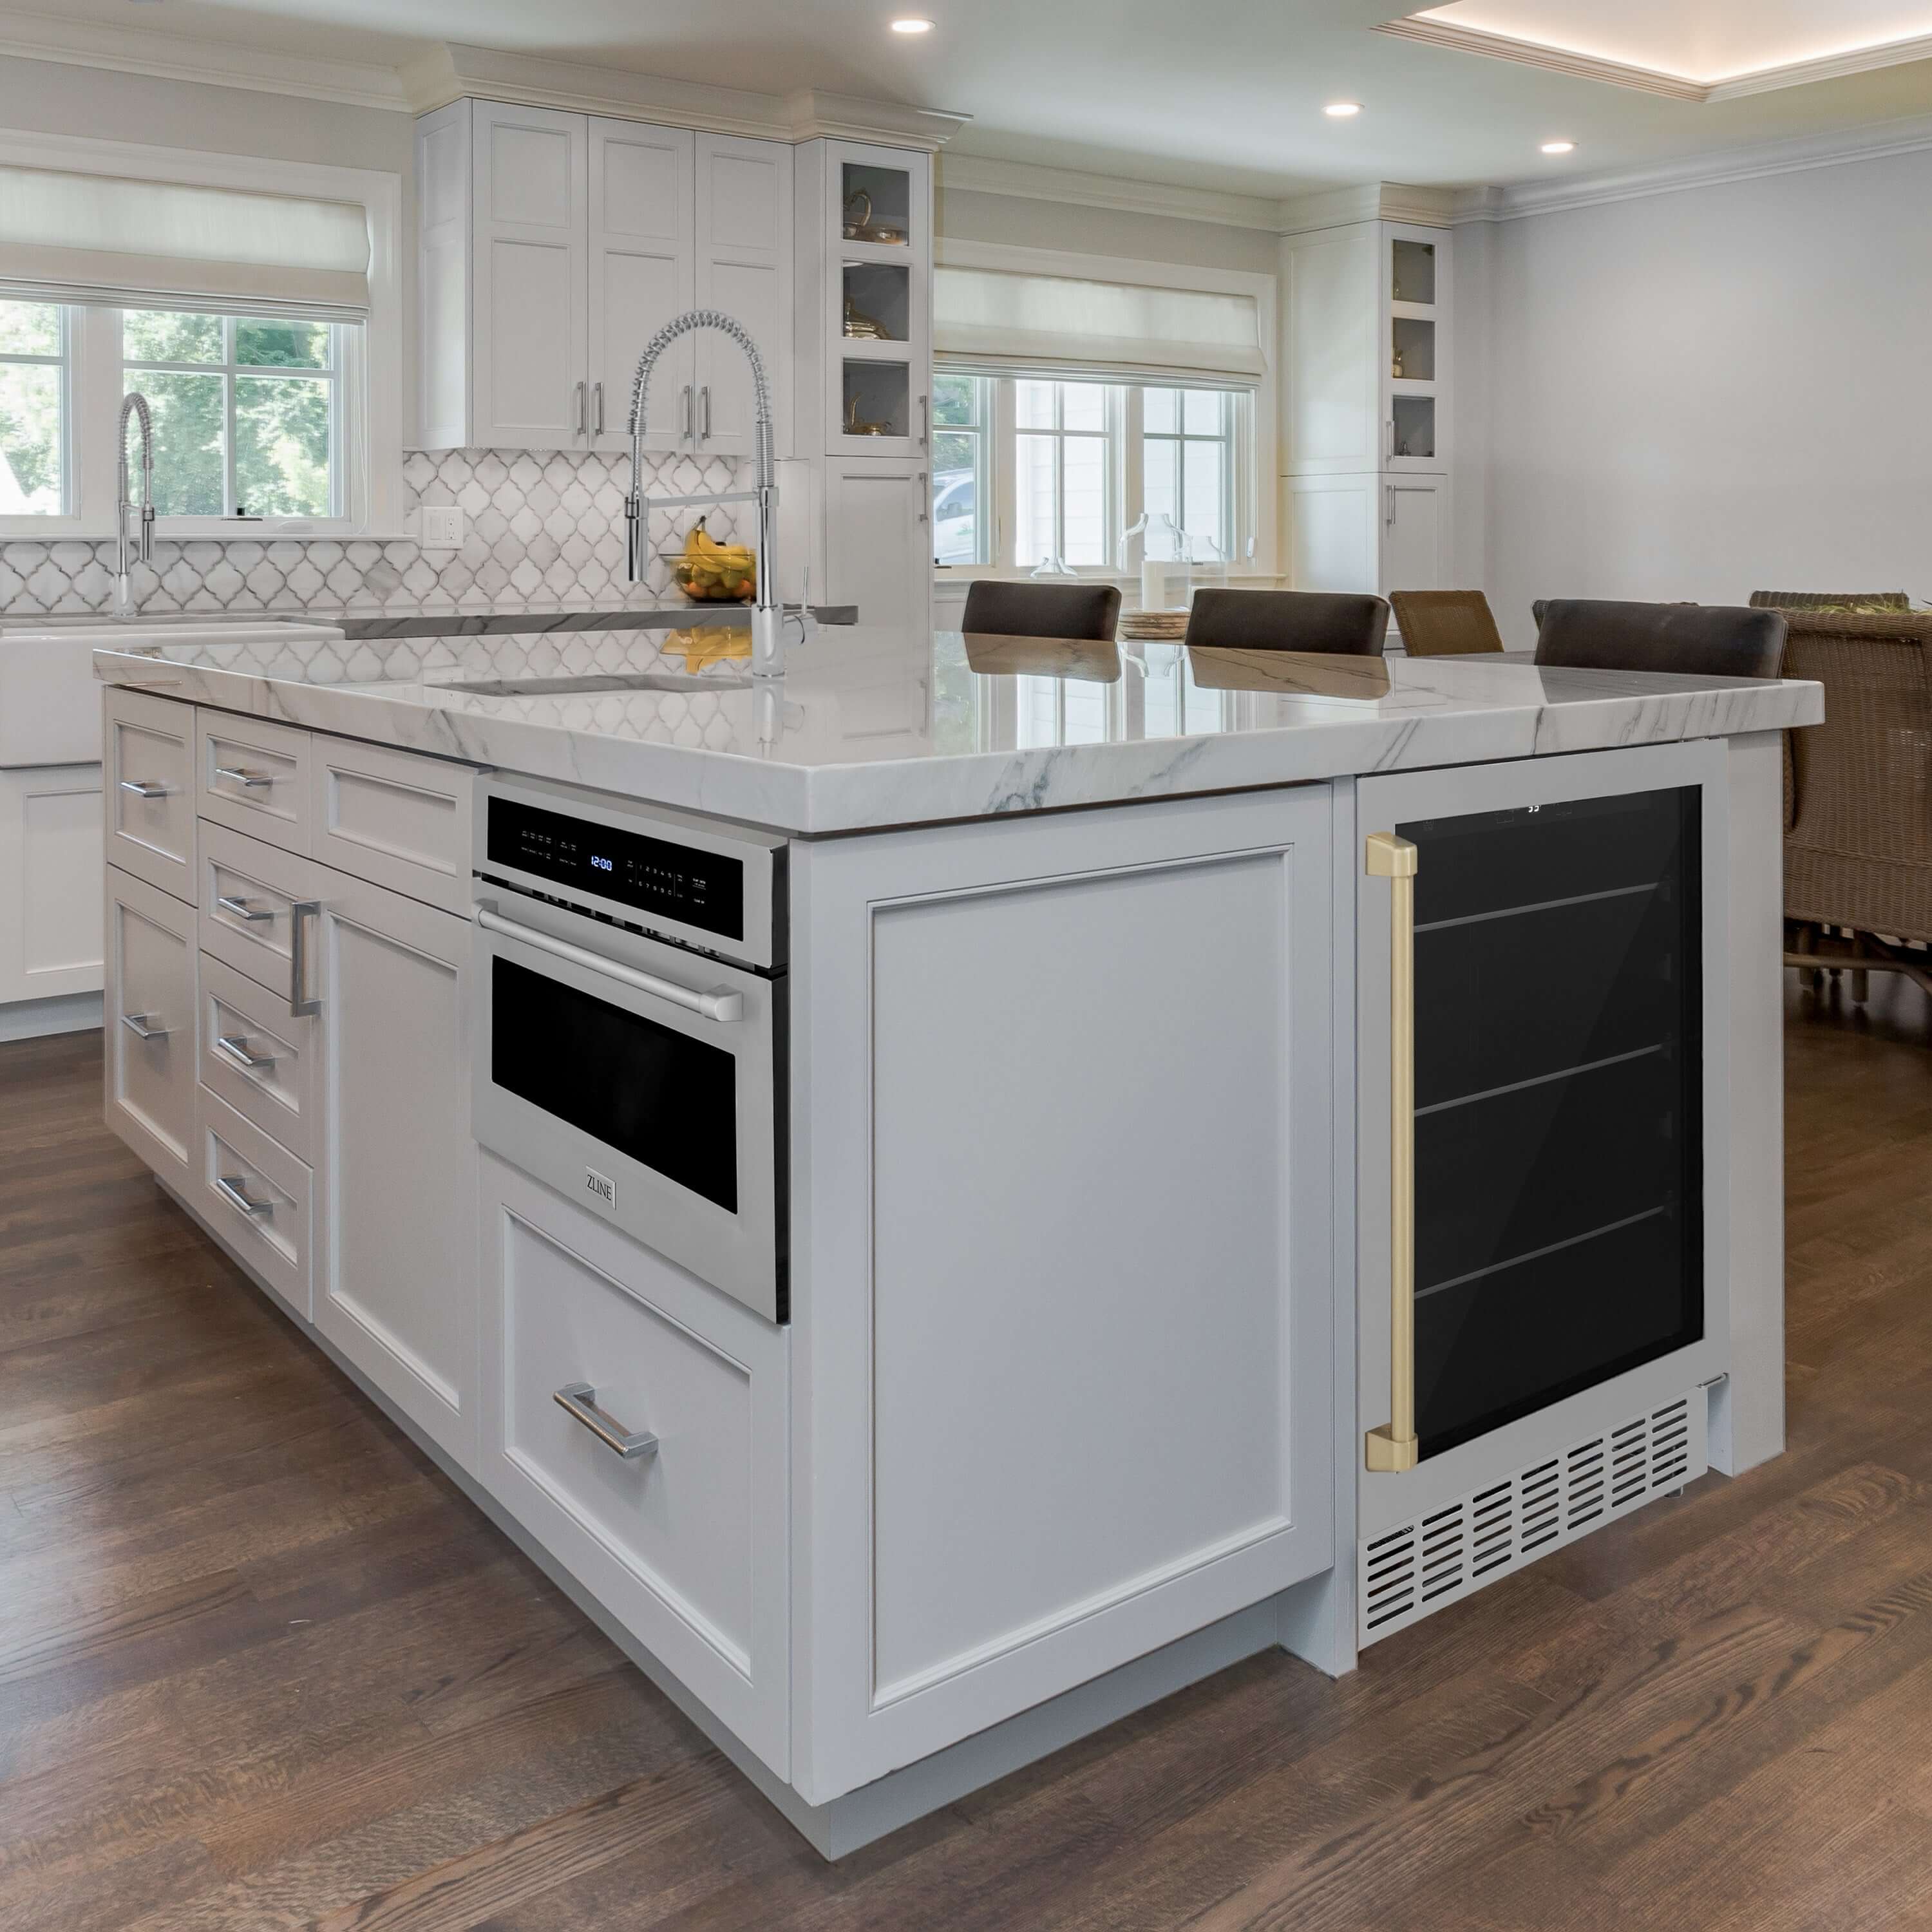 ZLINE dual zone wine cooler built-in to white kitchen island with marble countertop